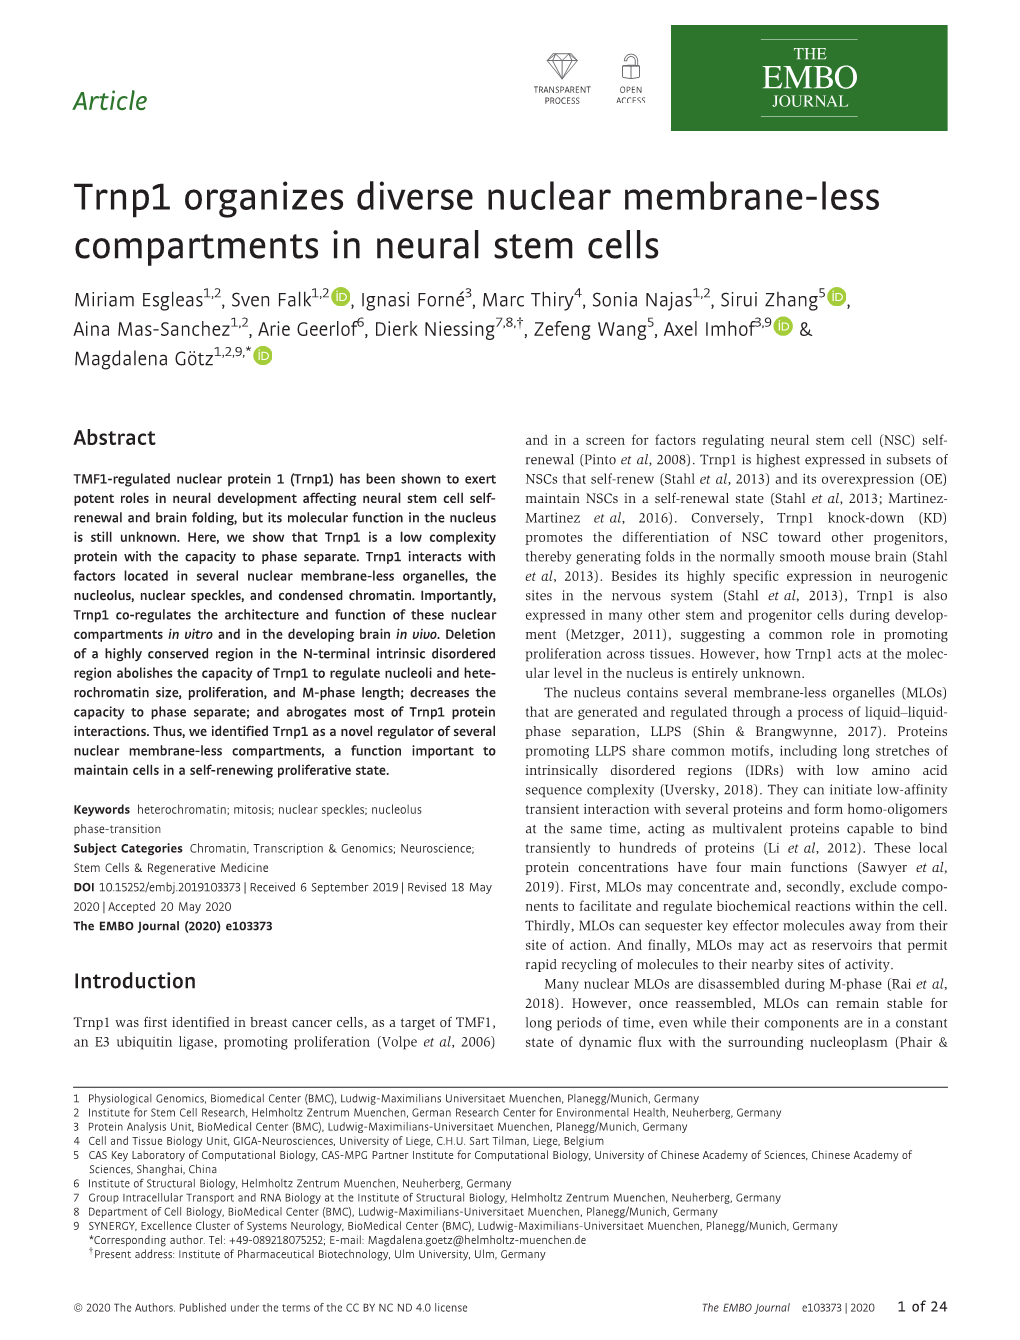 Trnp1 Organizes Diverse Nuclear Membrane‐Less Compartments In